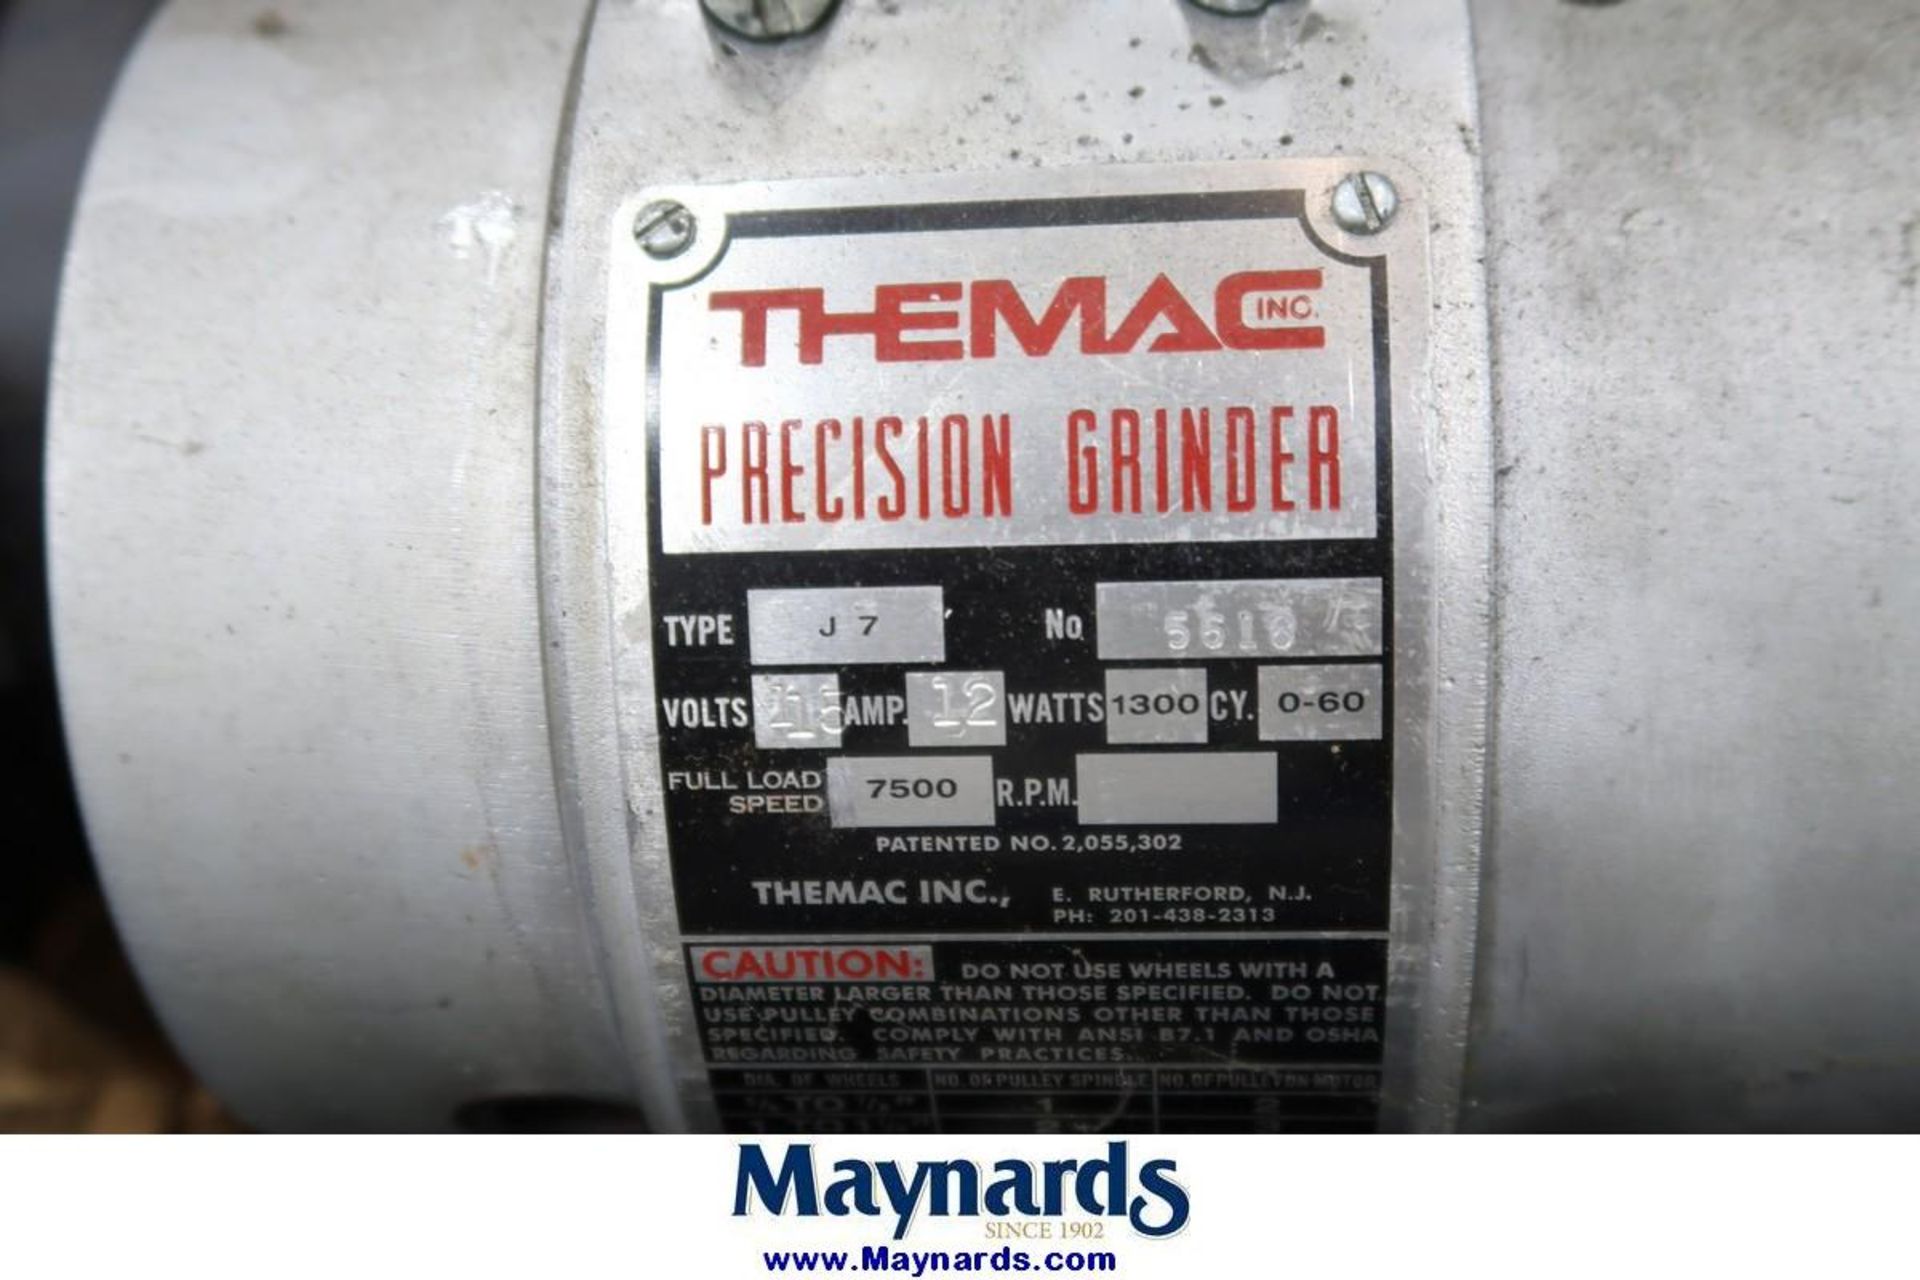 Themag J7 Tool Post Grinder - Image 3 of 3